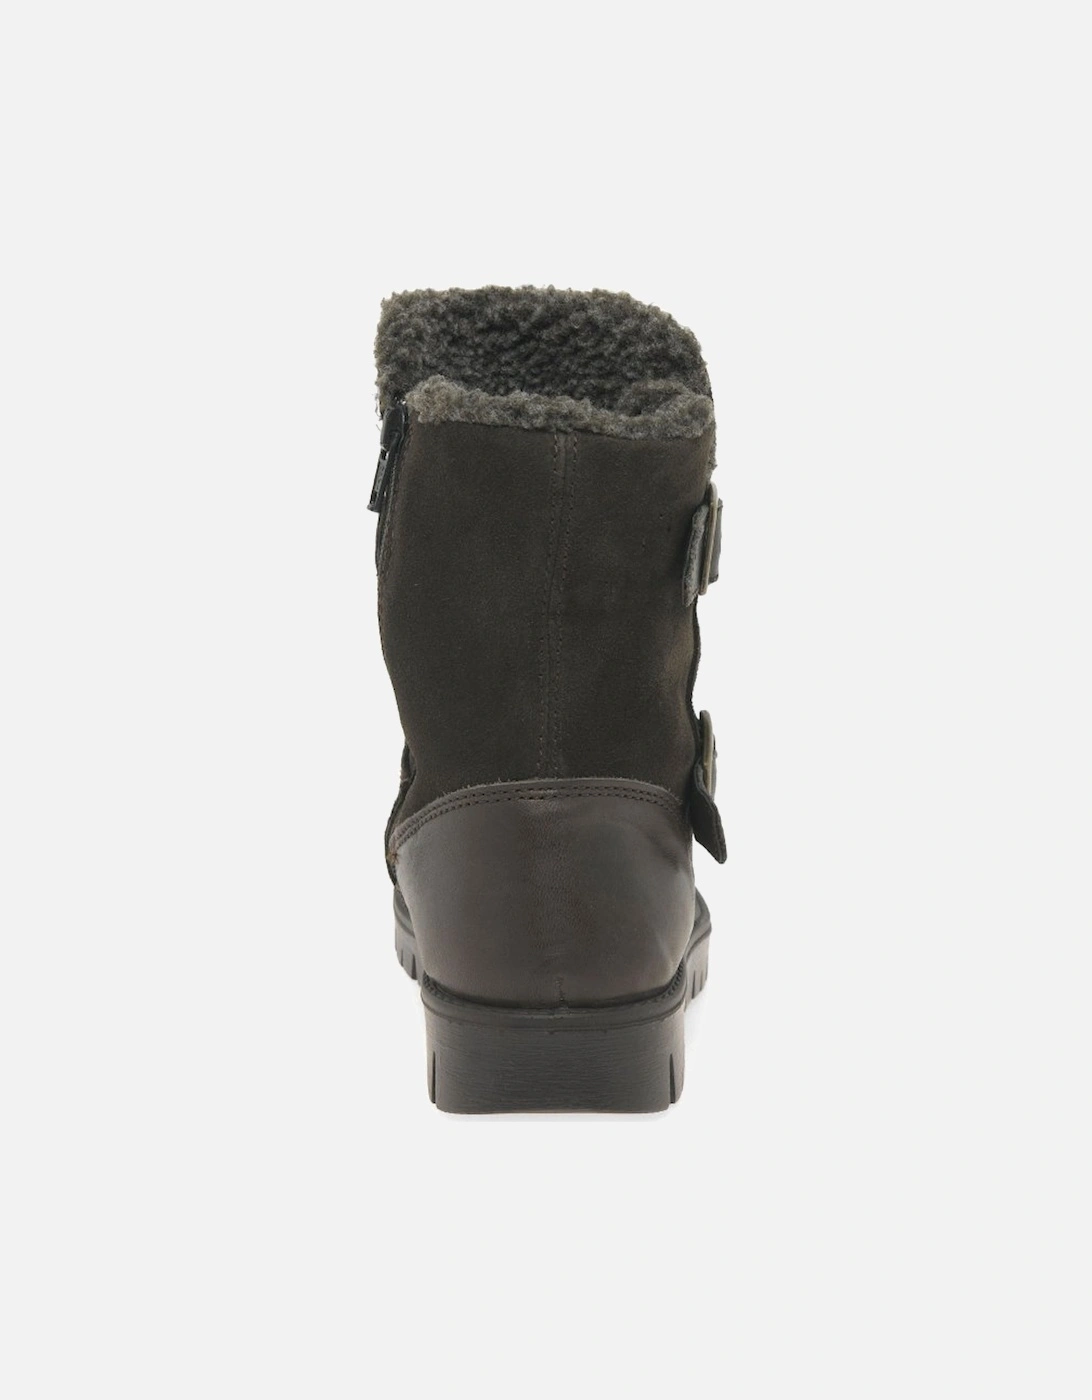 Snapdragon Girls Ankle Boots